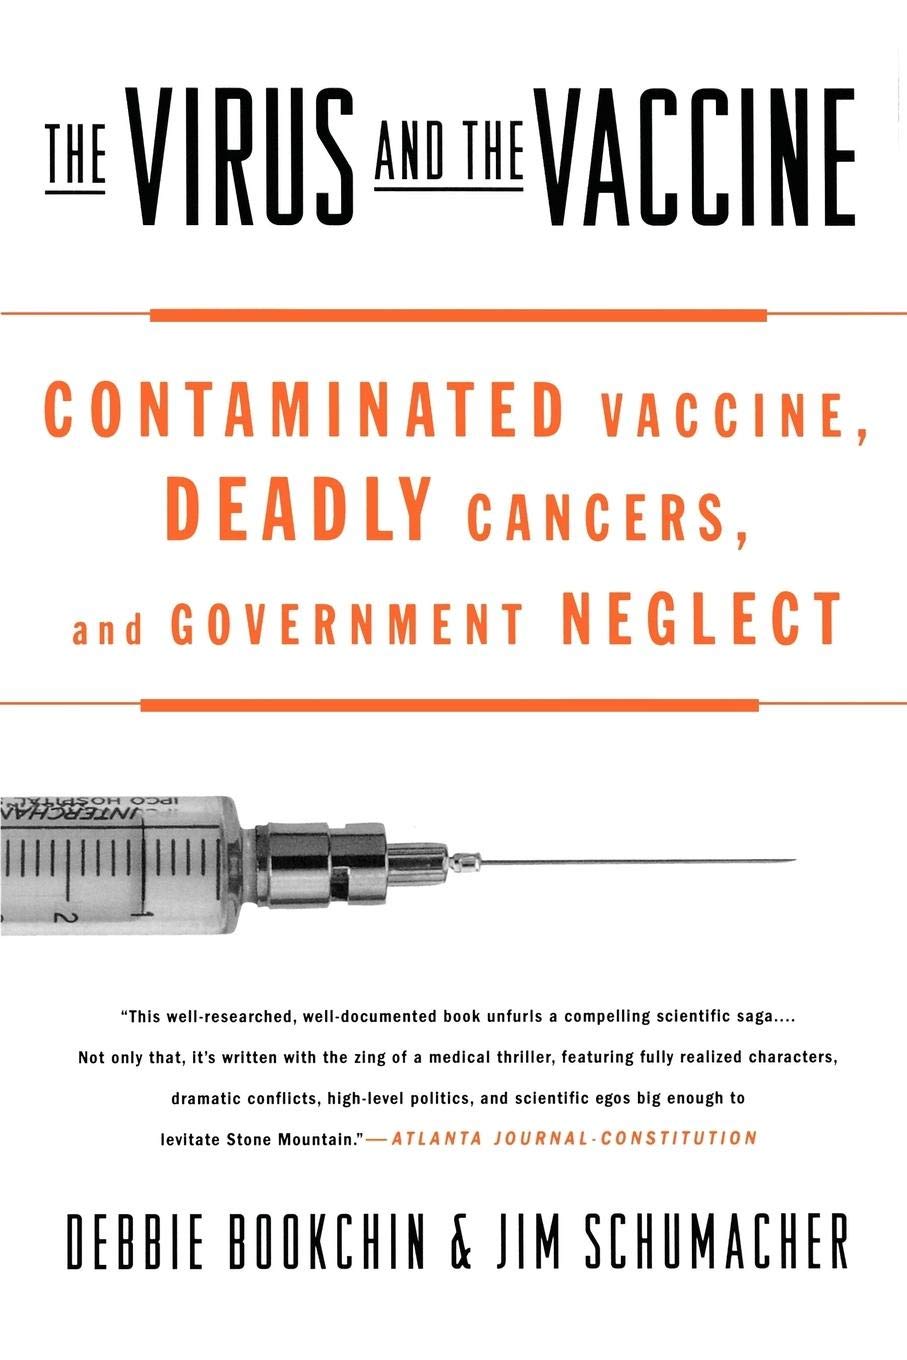 The Virus and the Vaccine: Contaminated Vaccine, Deadly Cancers, and Government Neglect by Debbie Bookchin, Jim Schumacher